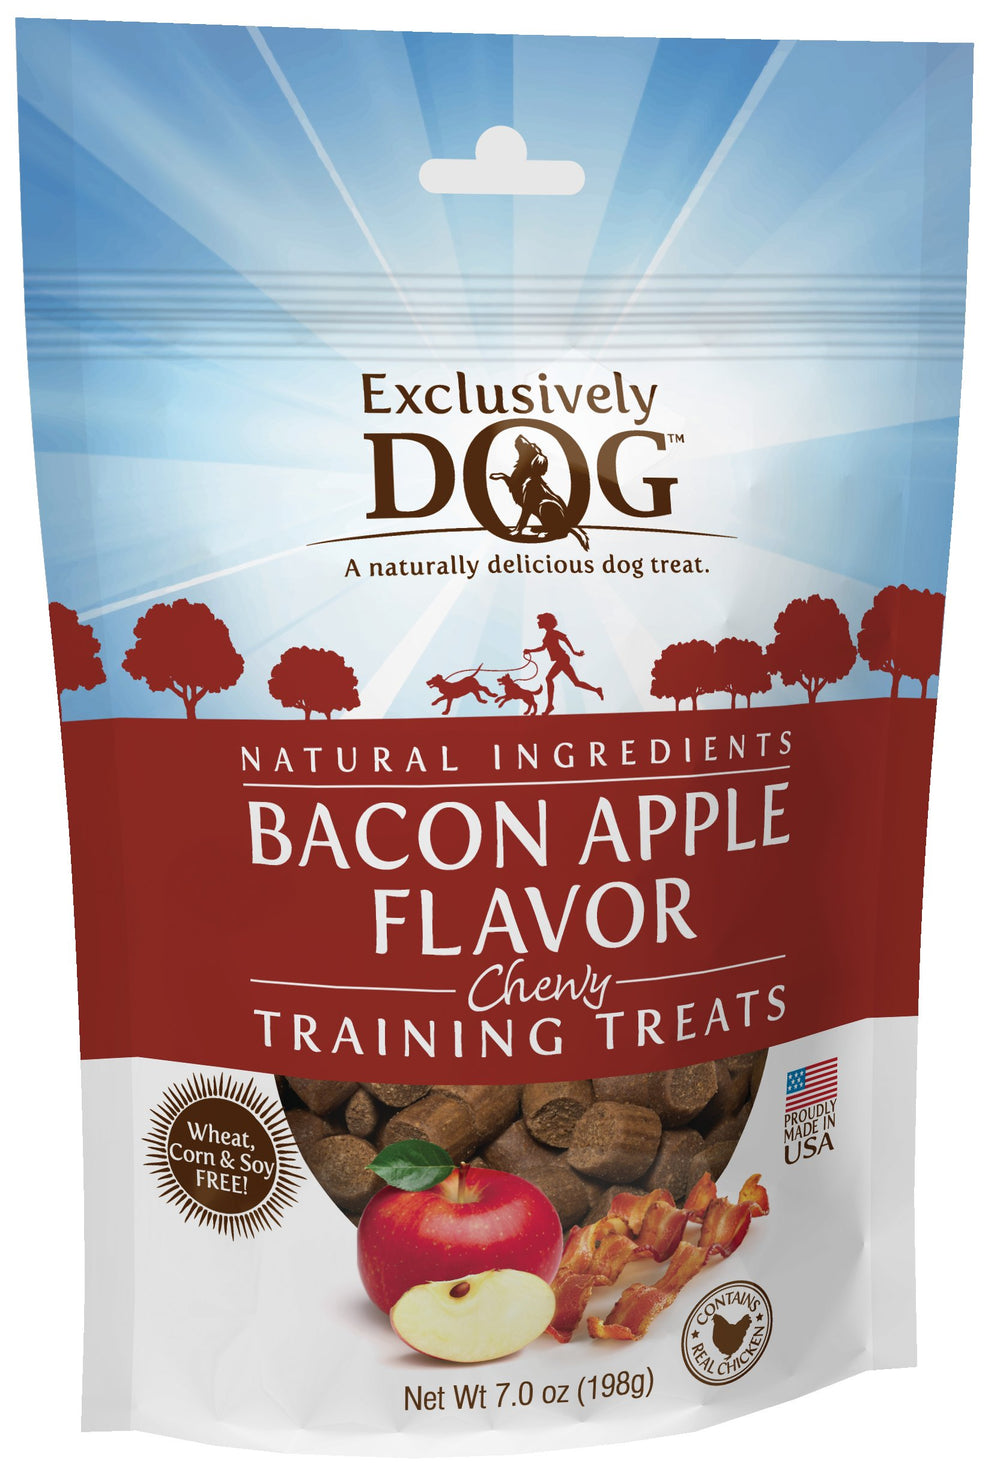 Exclusively Dog Training Treats, Bacon Apple Flavor